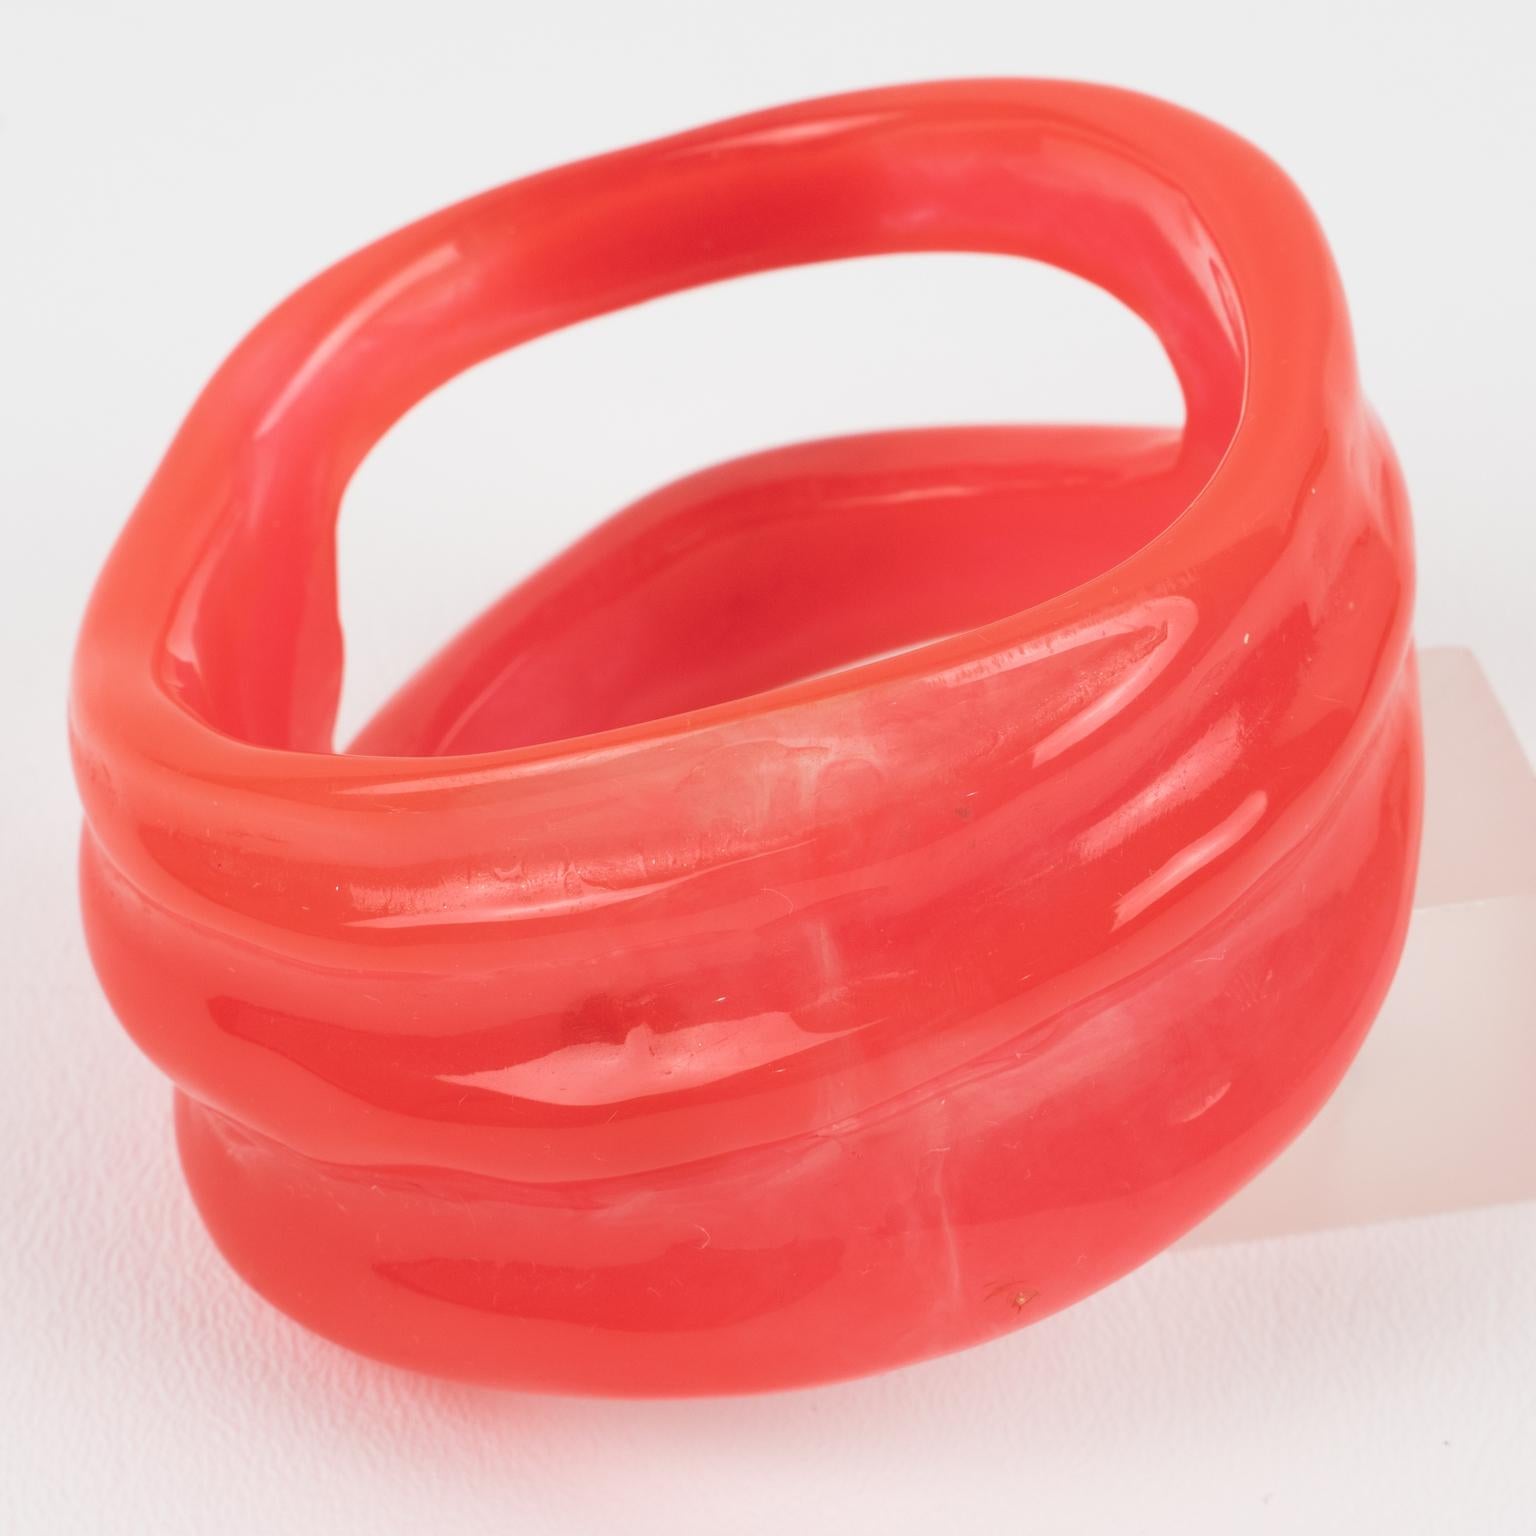 A futuristic Space Age Christian Lacroix Paris massive bangle bracelet. Chunky free-form structural and carved design in pink-red watermelon-colored resin or Lucite with swirling and transparency. Signed on the inside with a silvered metal tag logo: